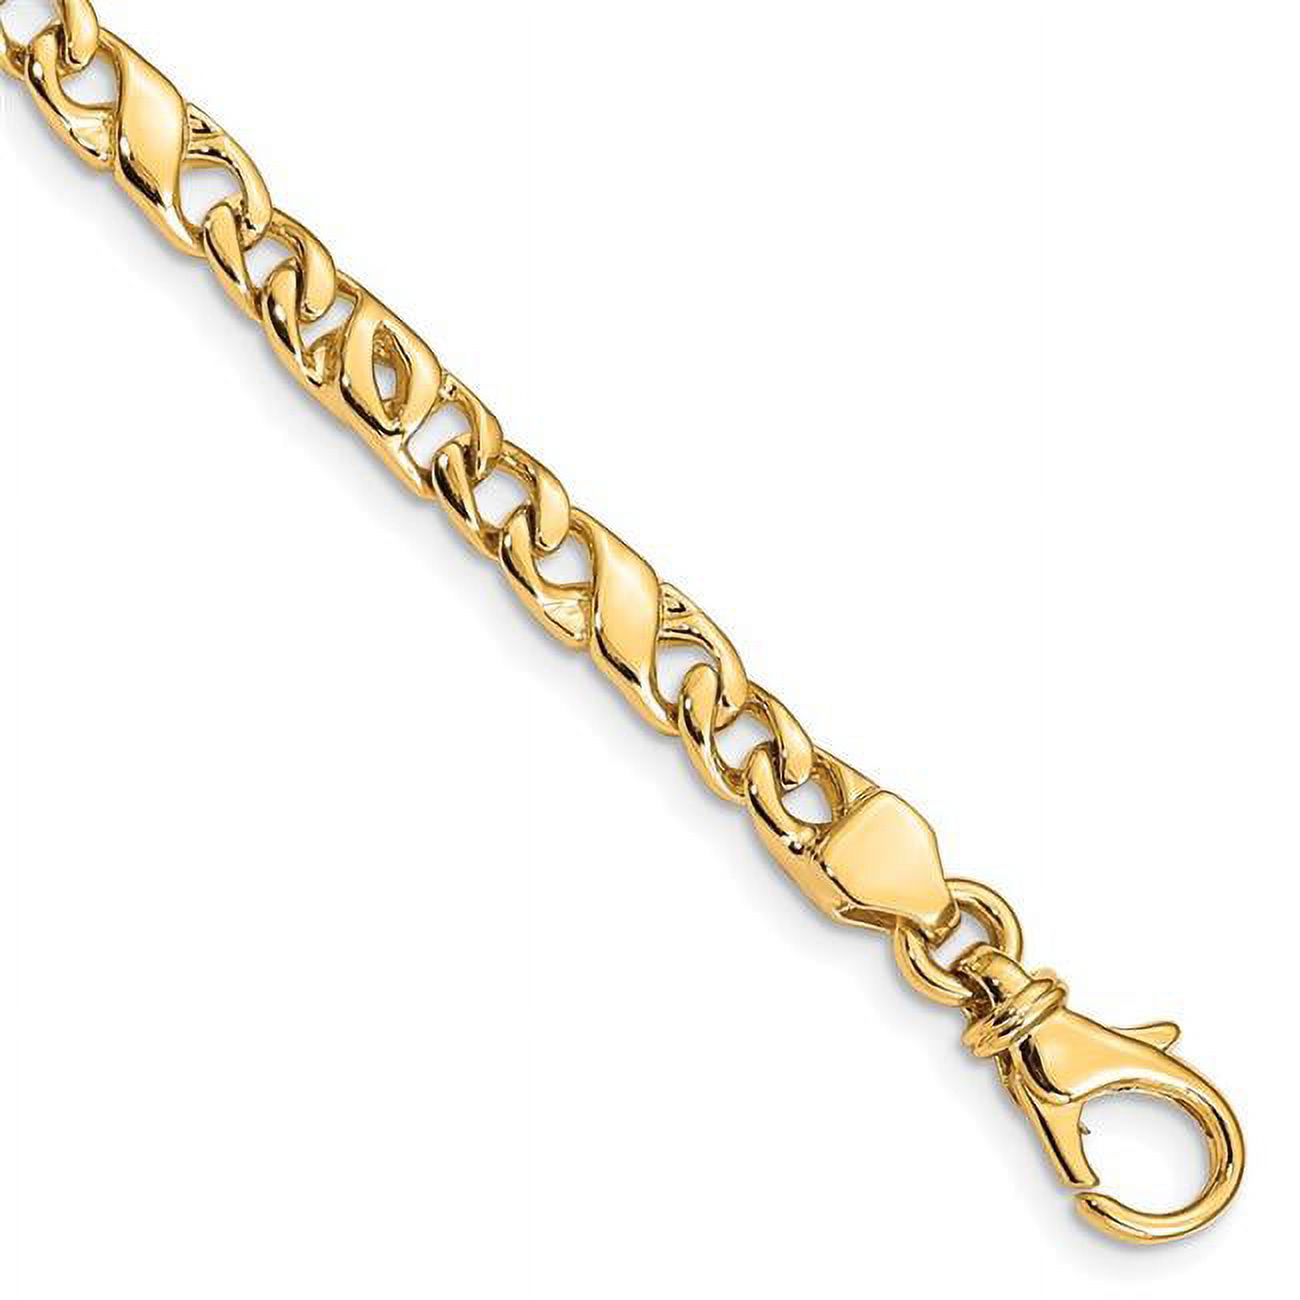 14k Yellow Gold Solid 5.00mm Fancy Link Chain - image 1 of 2